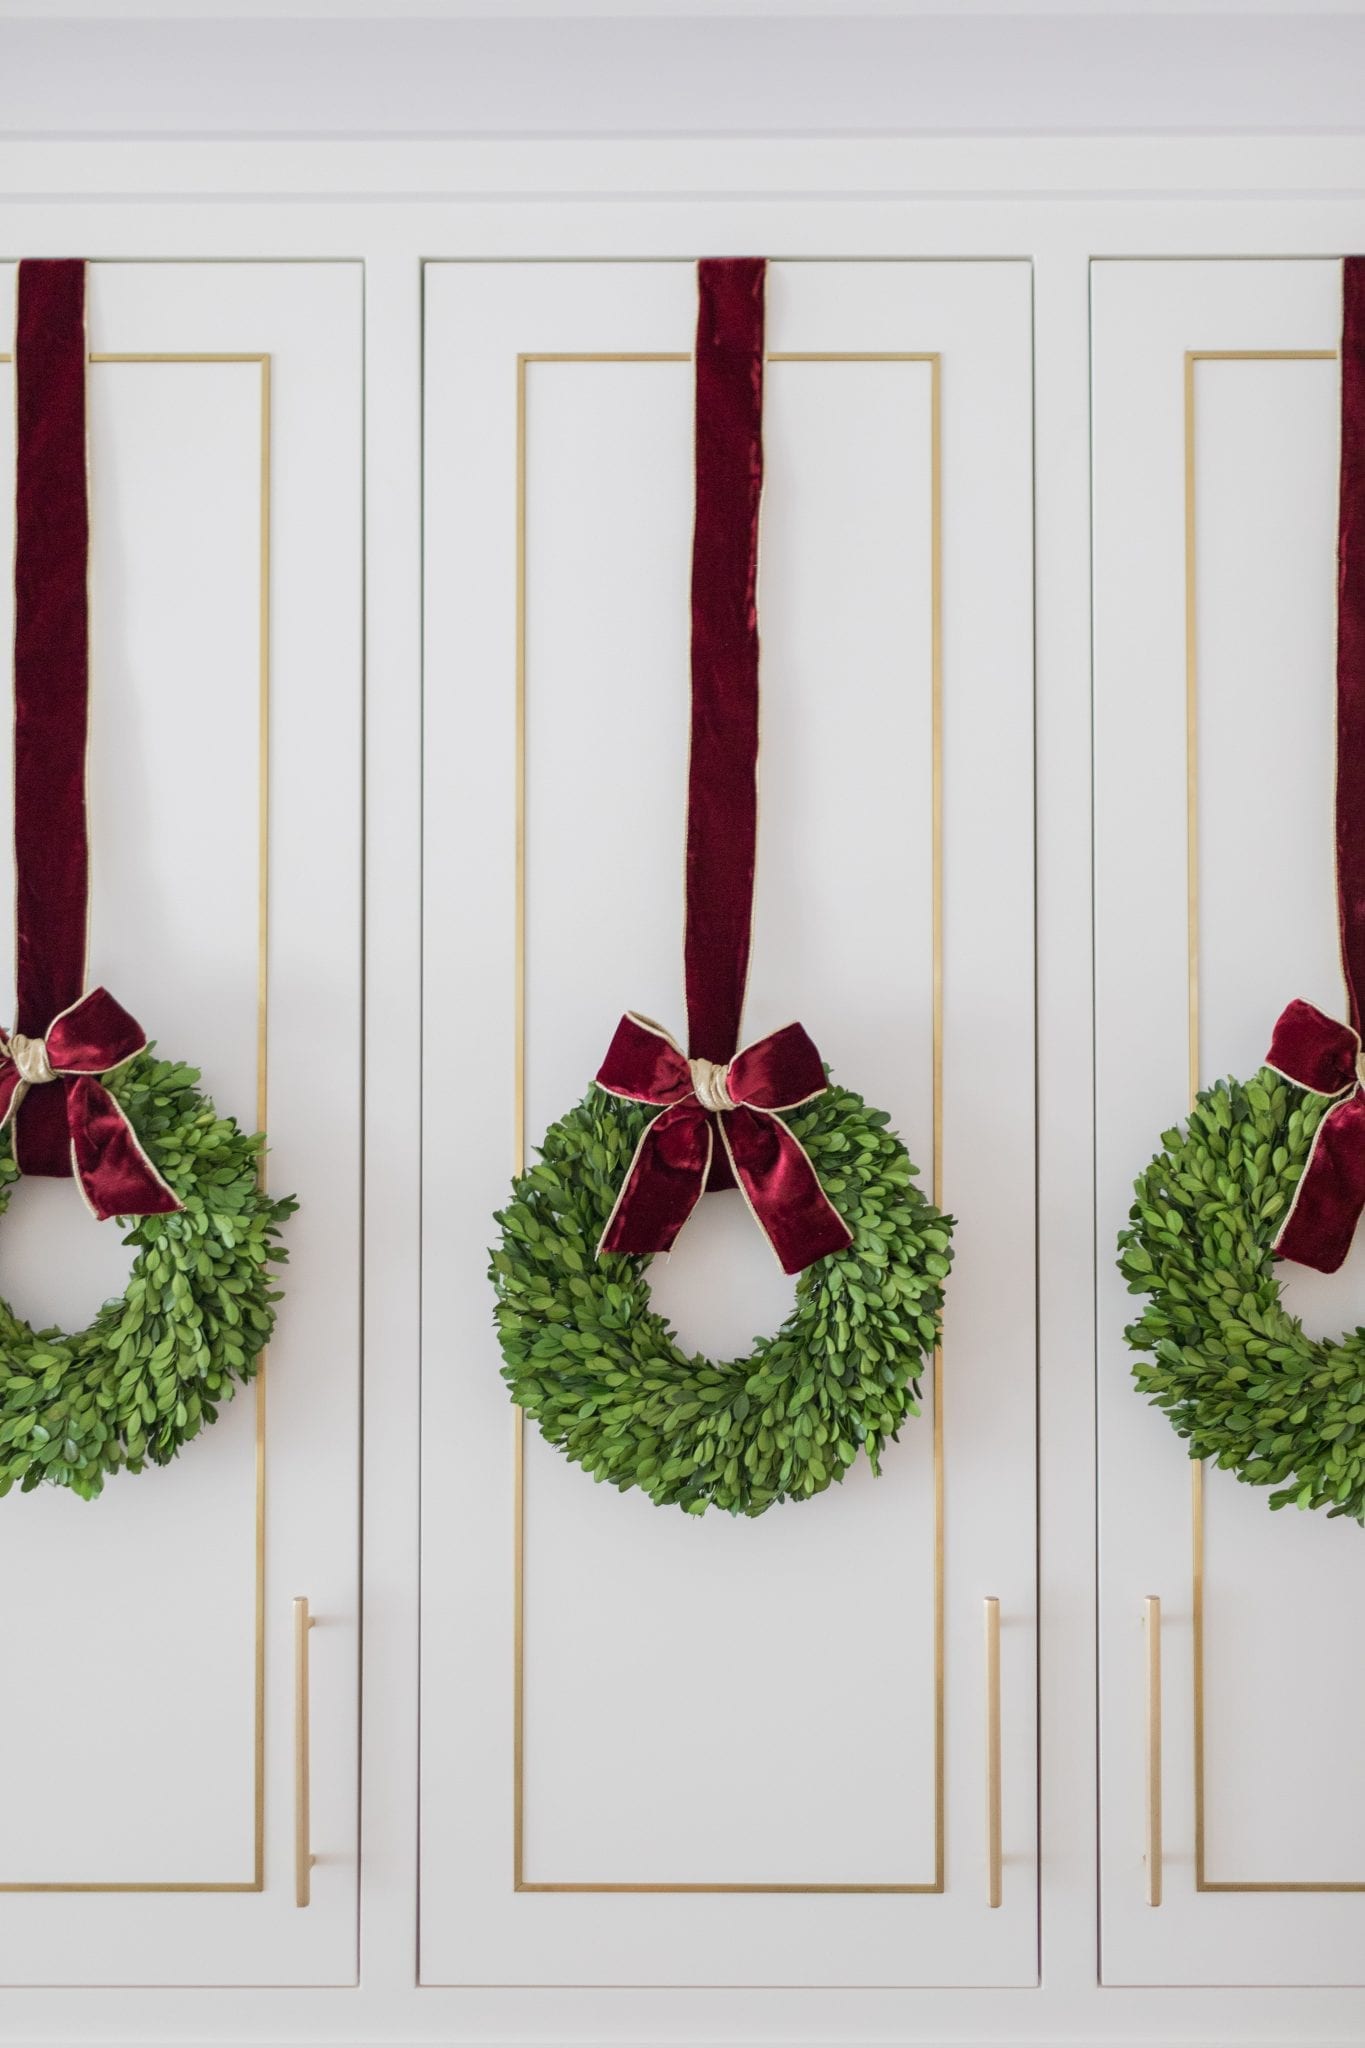 Let's face it, you can decorate for Christmas in almost every room, but where do you spend the most of your time? The kitchen! Add Christmas cabinet wreaths will bring you so much joy all Christmas long! Kitchen cabinet wreaths make a beautiful statement whether you are using mini wreaths for cabinets or one big wreath in the kitchen. Learn how to hang wreaths on kitchen cabinets without ruining them! kitchen cabinet wreaths, mini wreaths for cabinets, wreath in kitchen